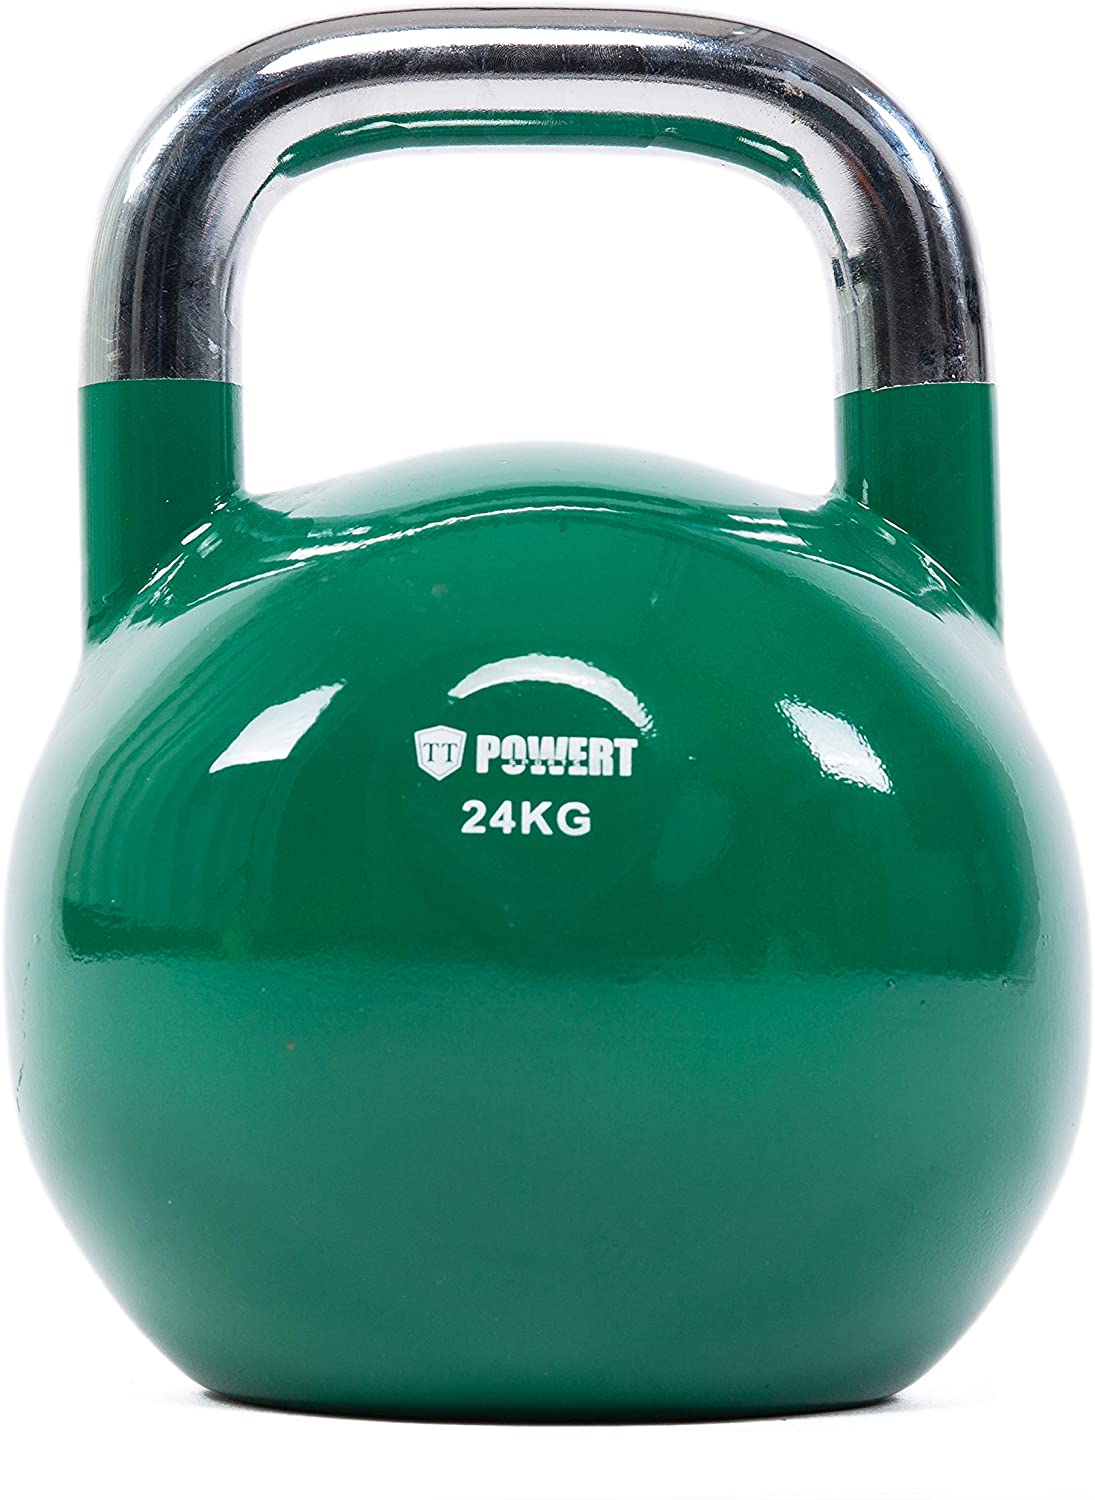 POWERT Competition Kettlebell|Premium Quality Coated Steel|Ergonomic Design|Great for Weight Lifting Workout & Core Strength Training& Muscle Building|Color Coded|Single